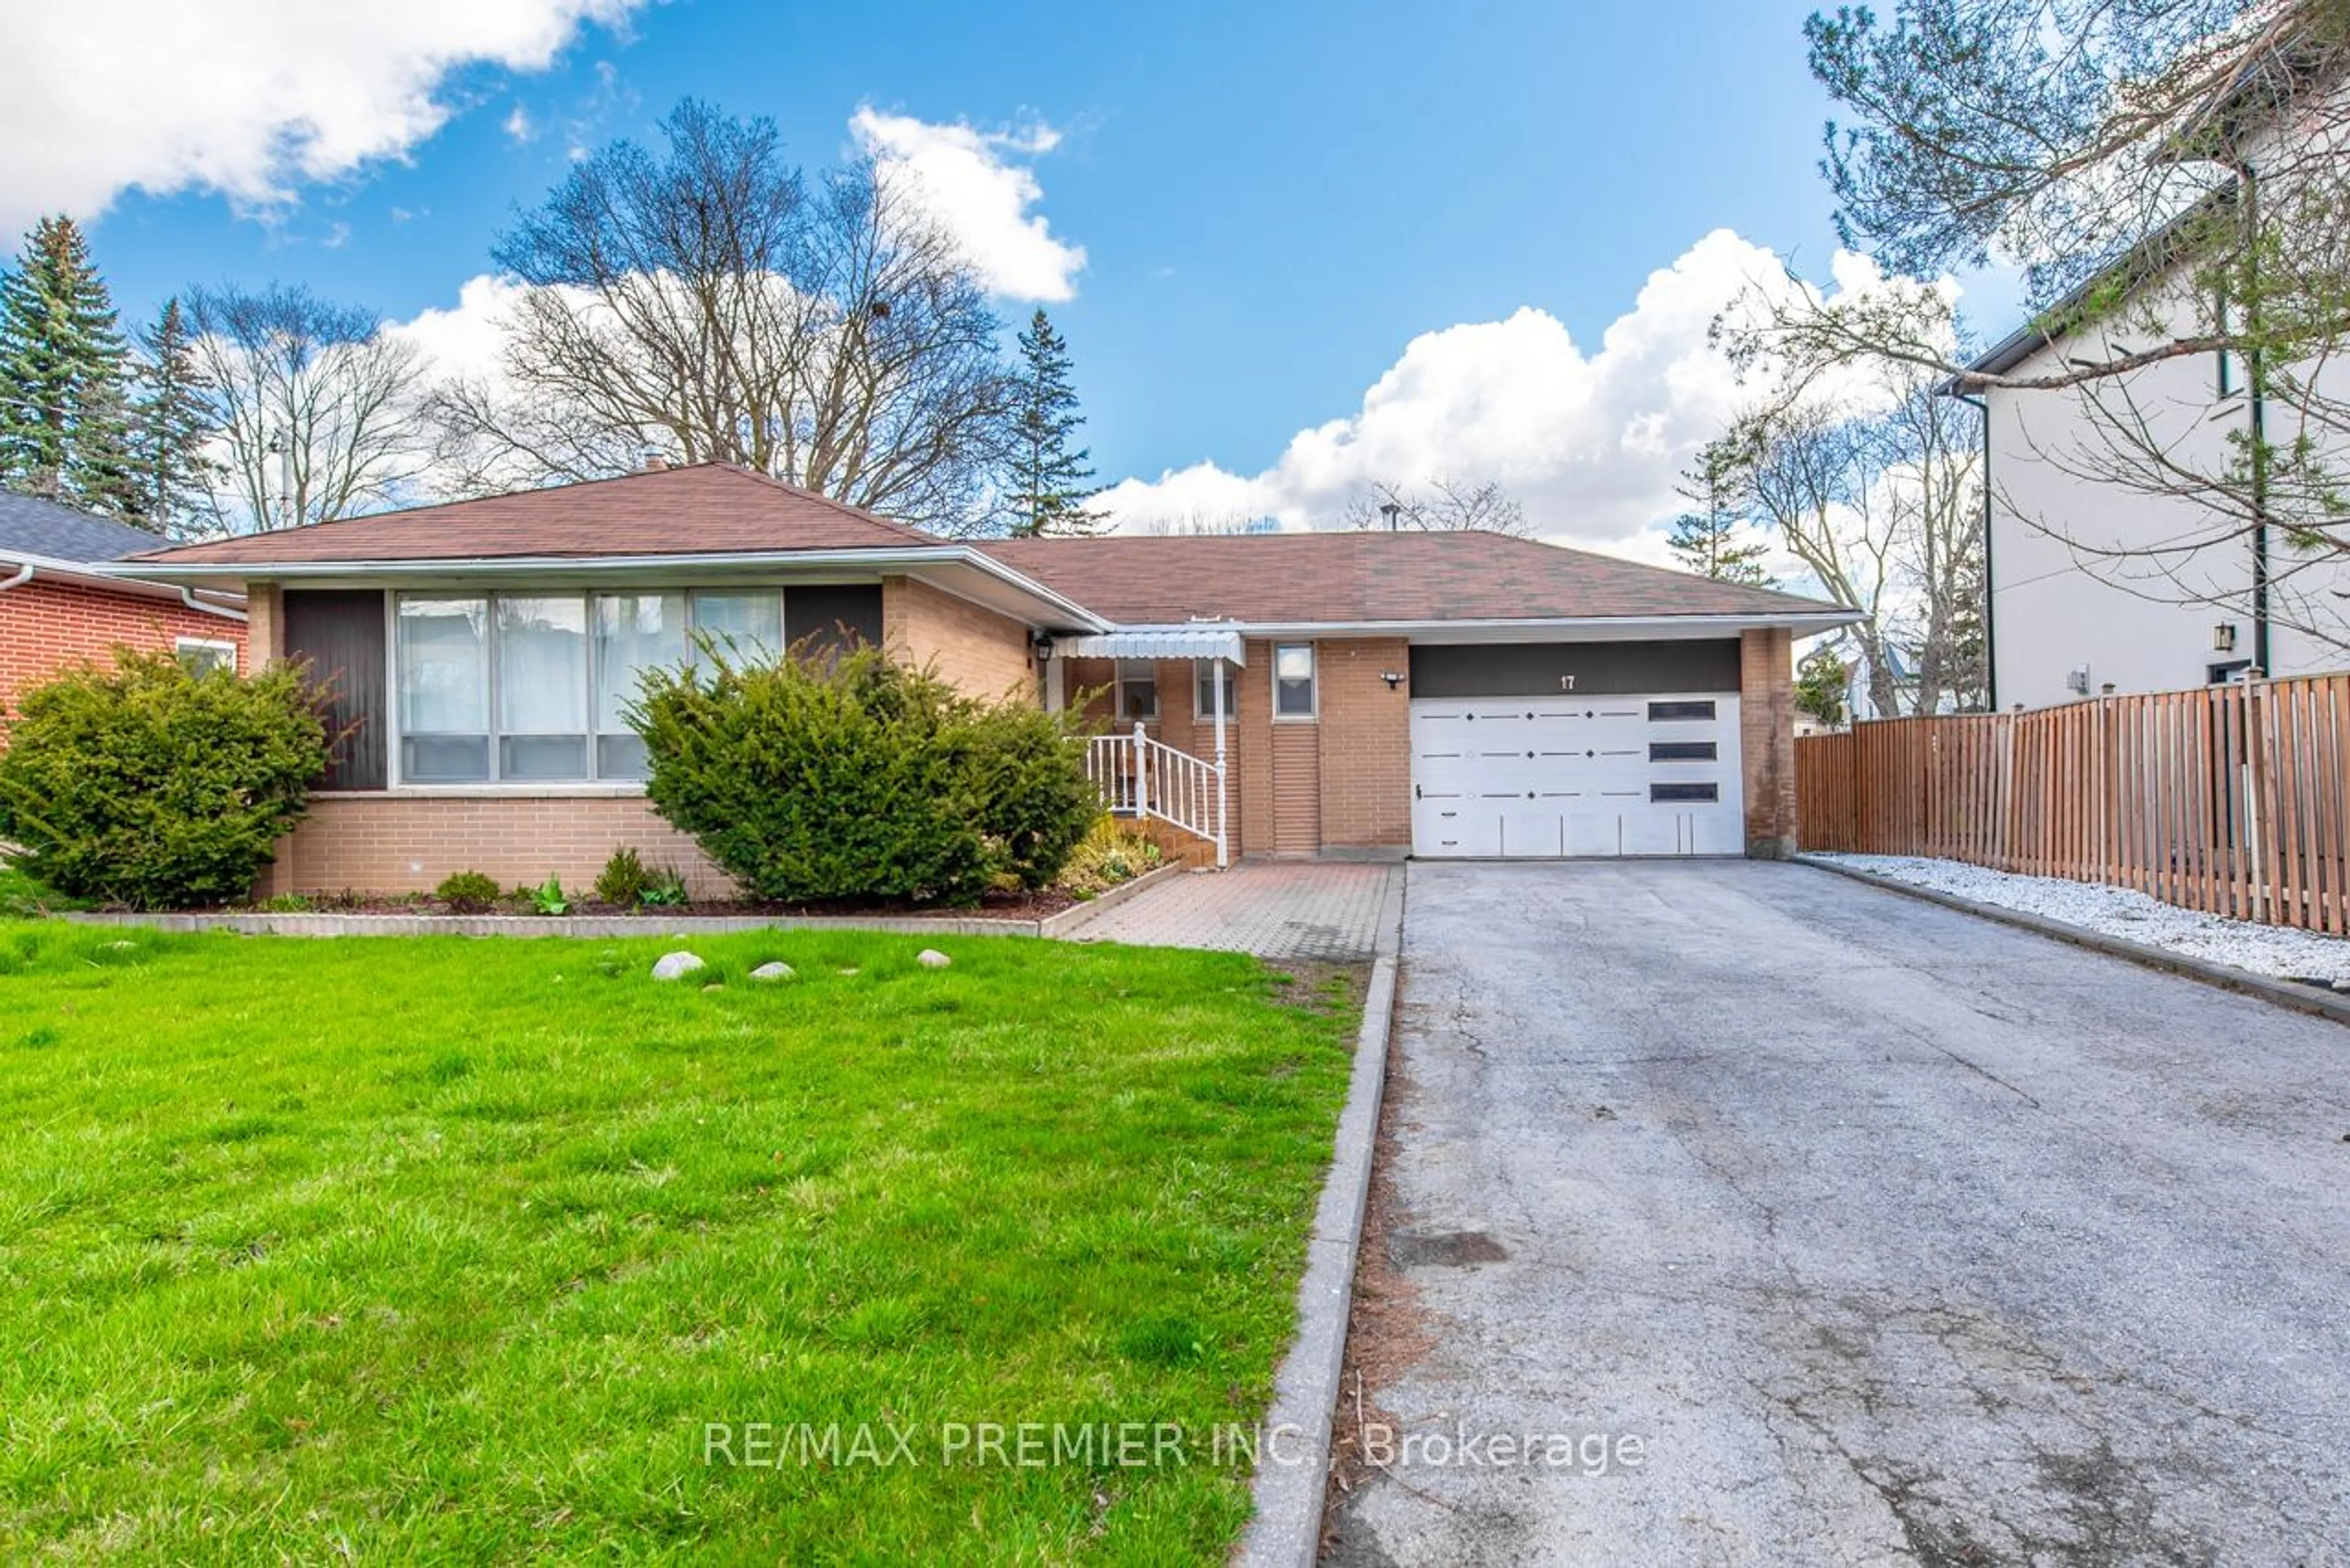 Frontside or backside of a home for 17 Ryder Rd, Vaughan Ontario L6A 1E4